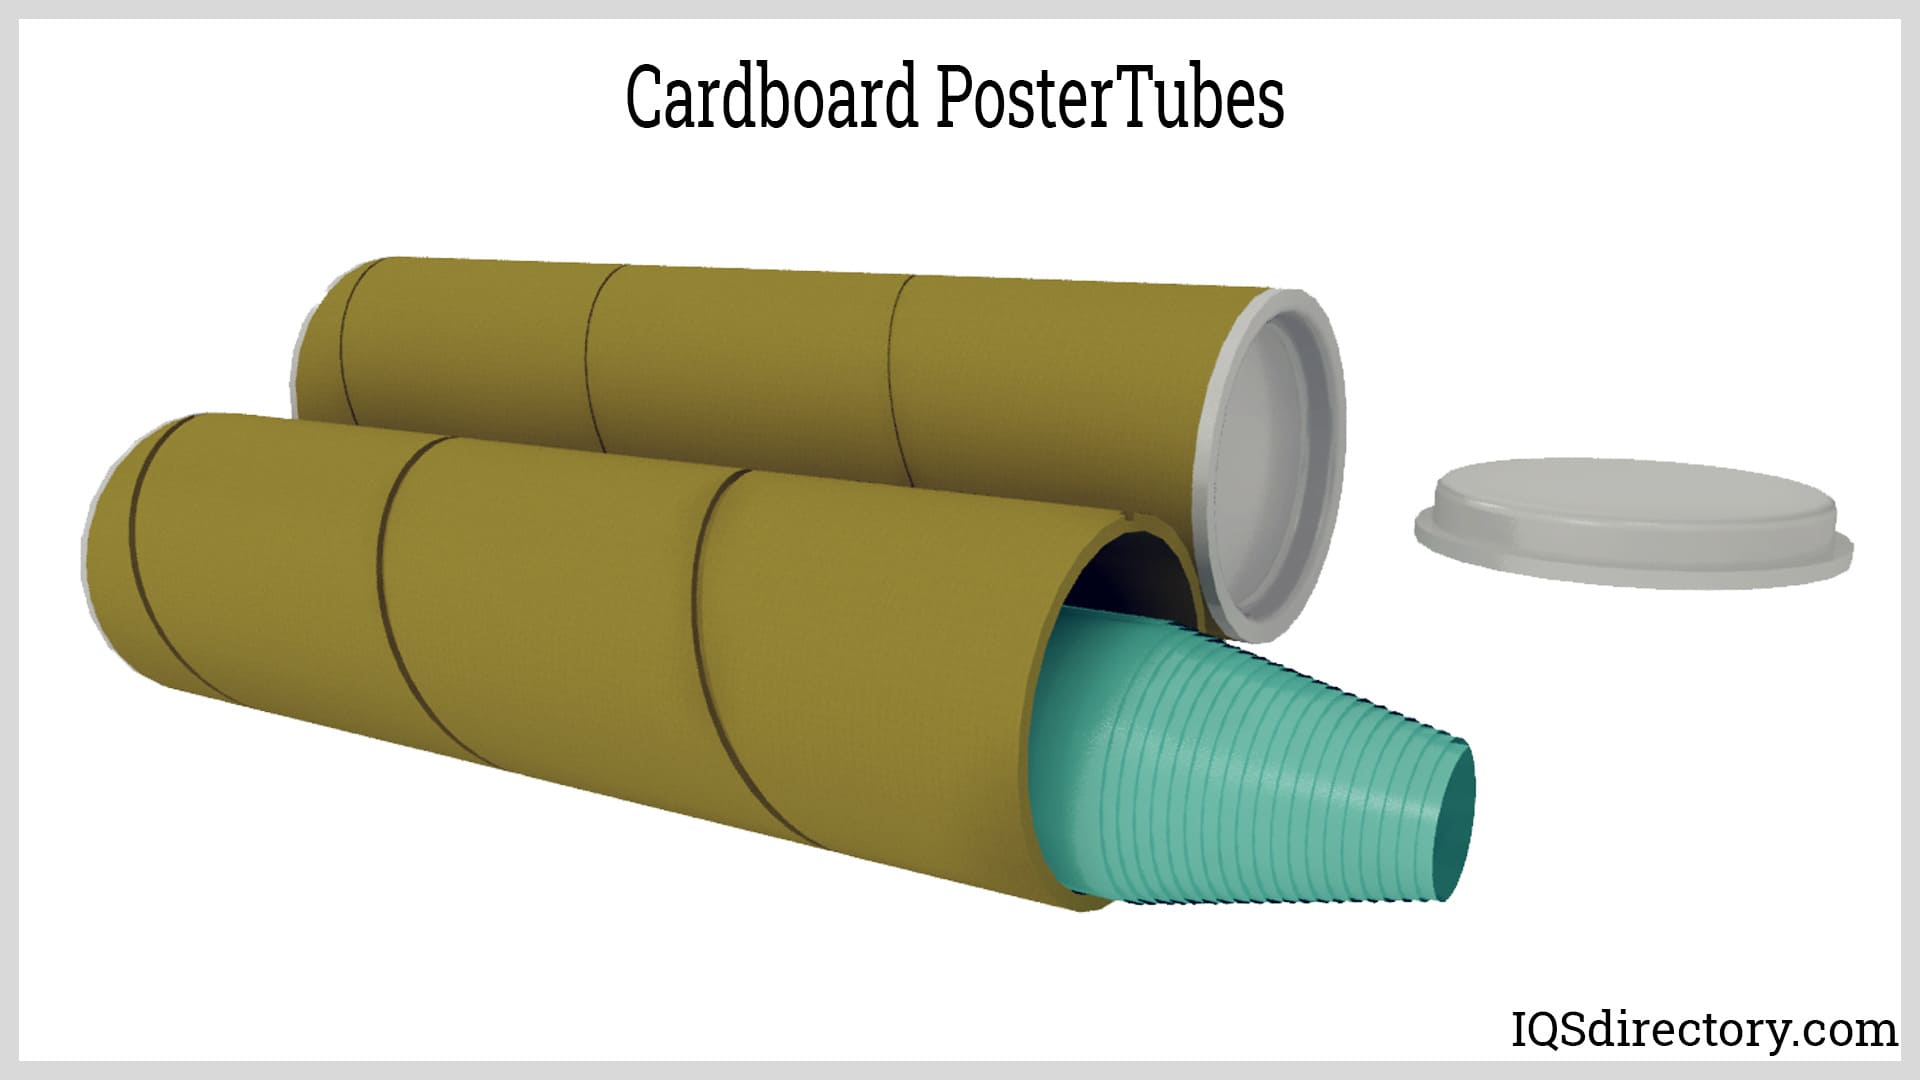 Poster Tube: Principle, Types, Applications, and Benefits